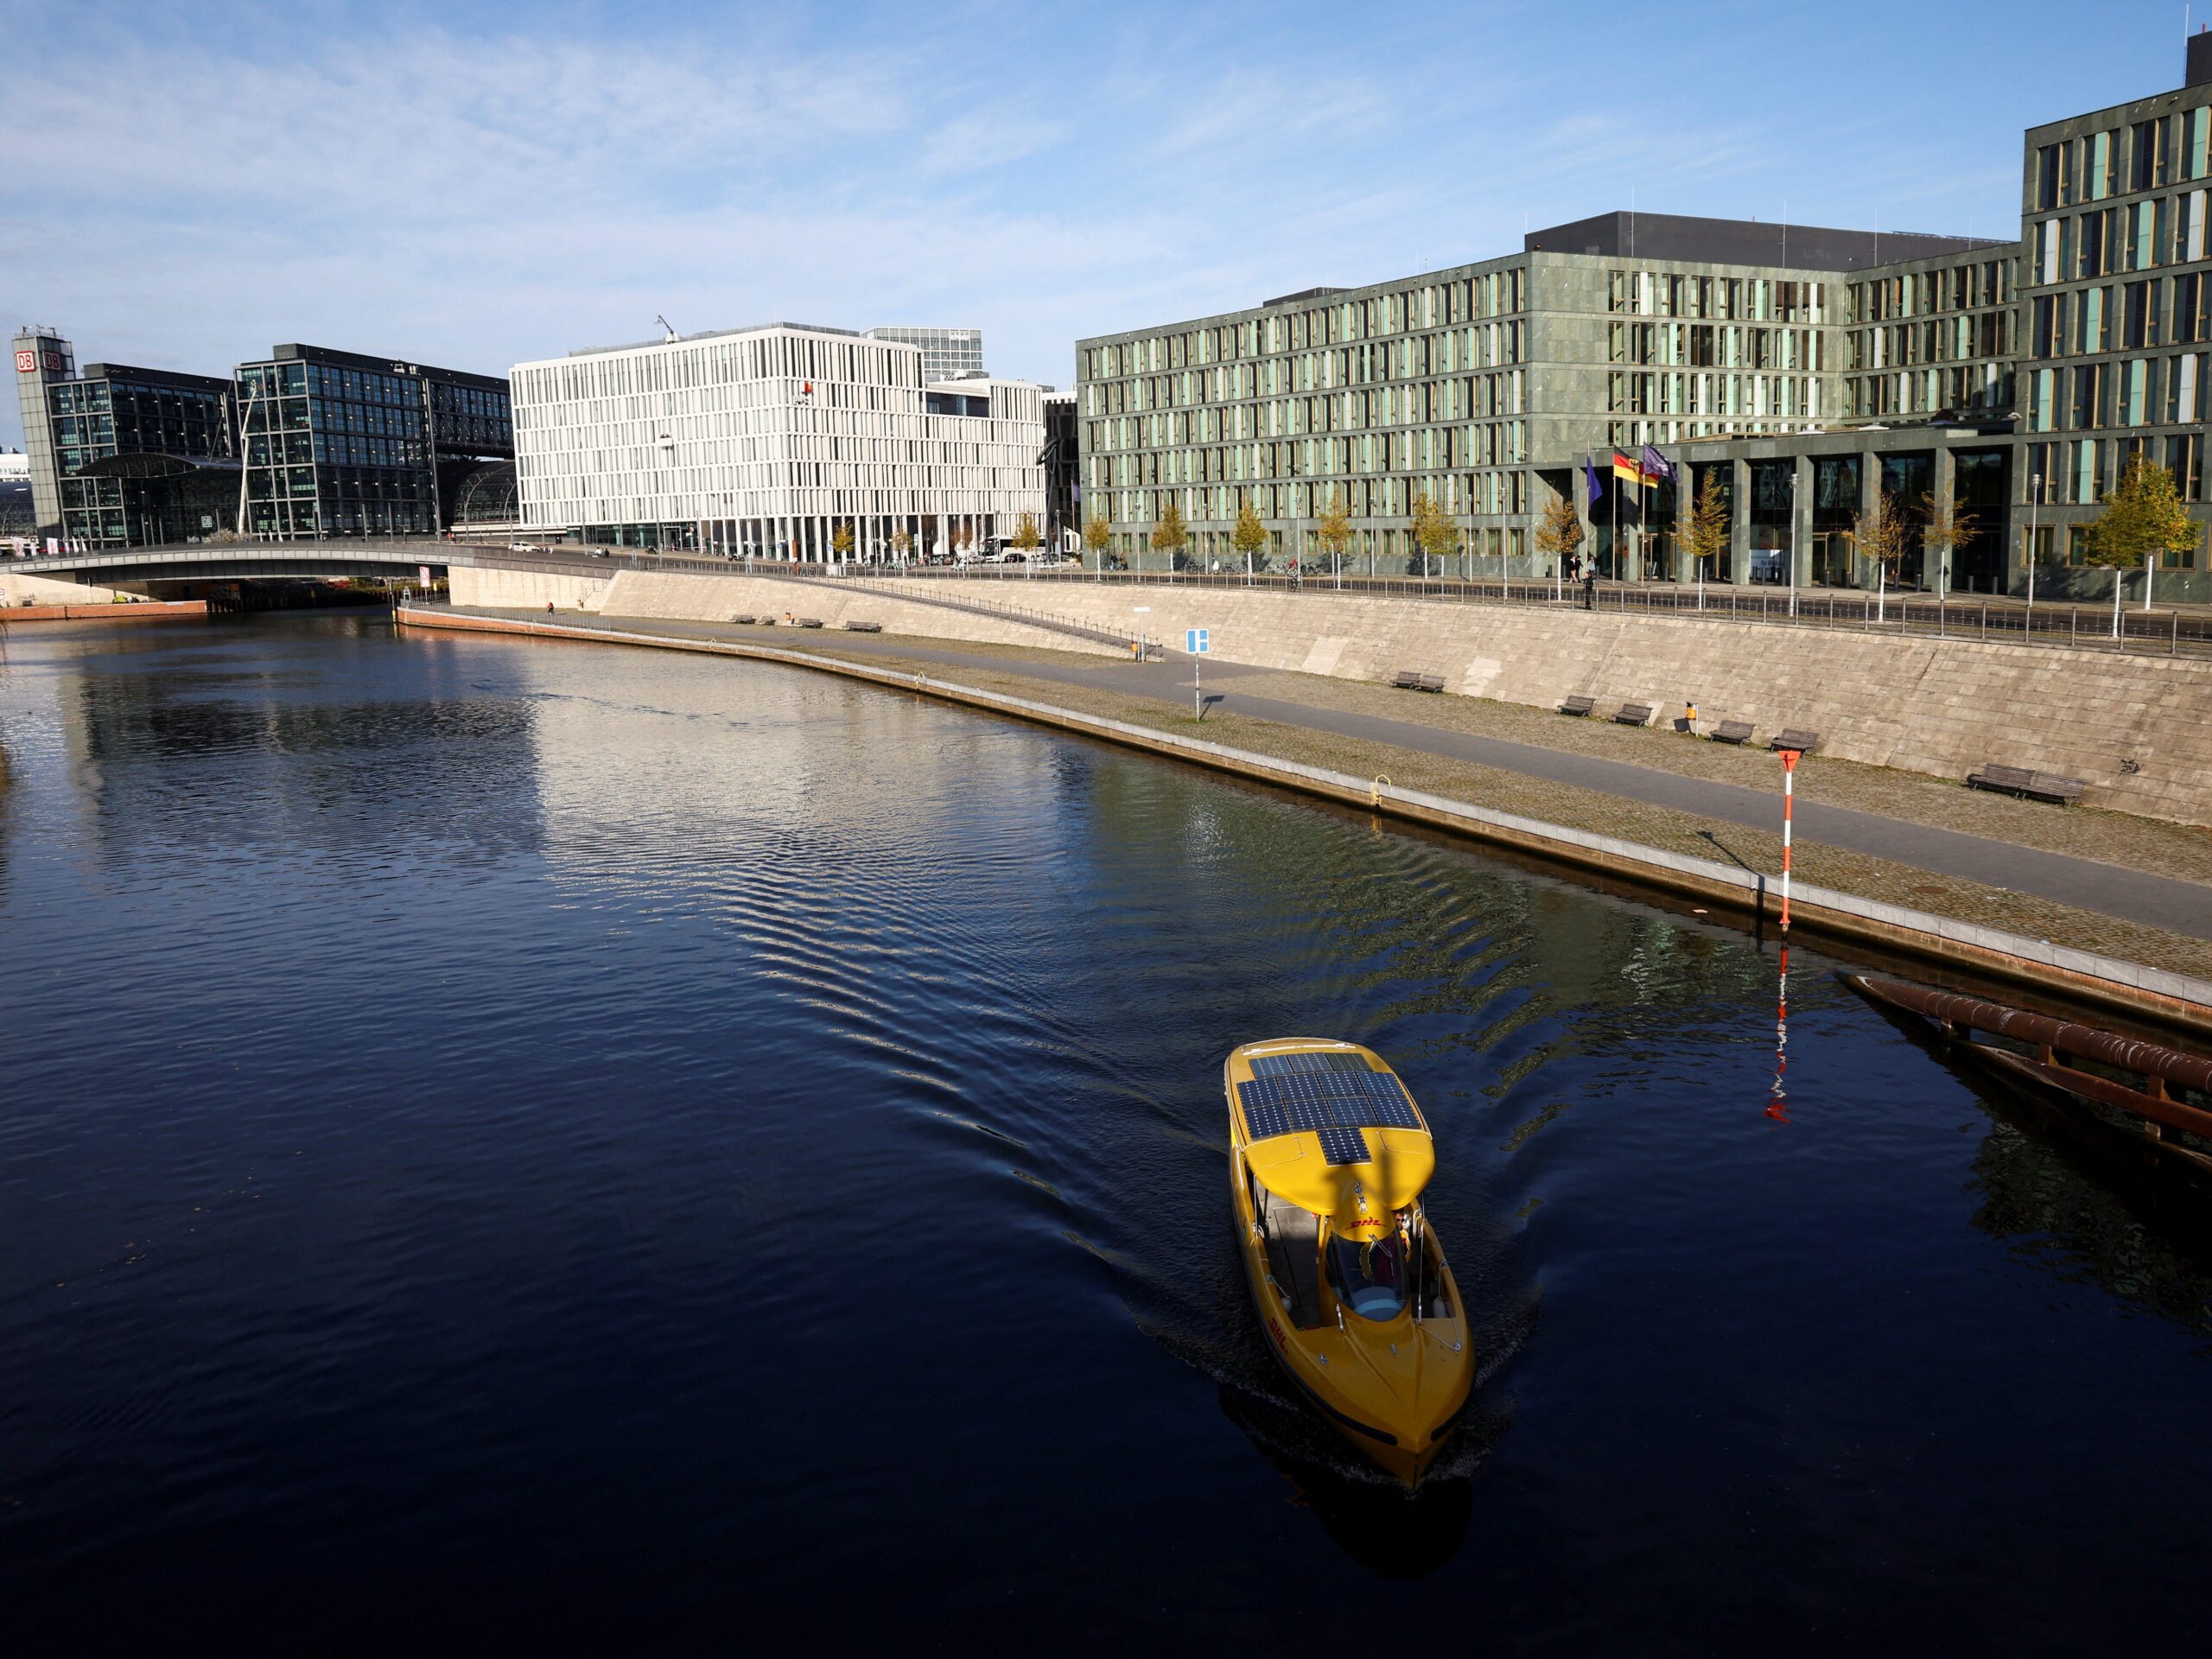 A bright yellow boat goes down a very still river in front of office buildings in Berlin, Germany.